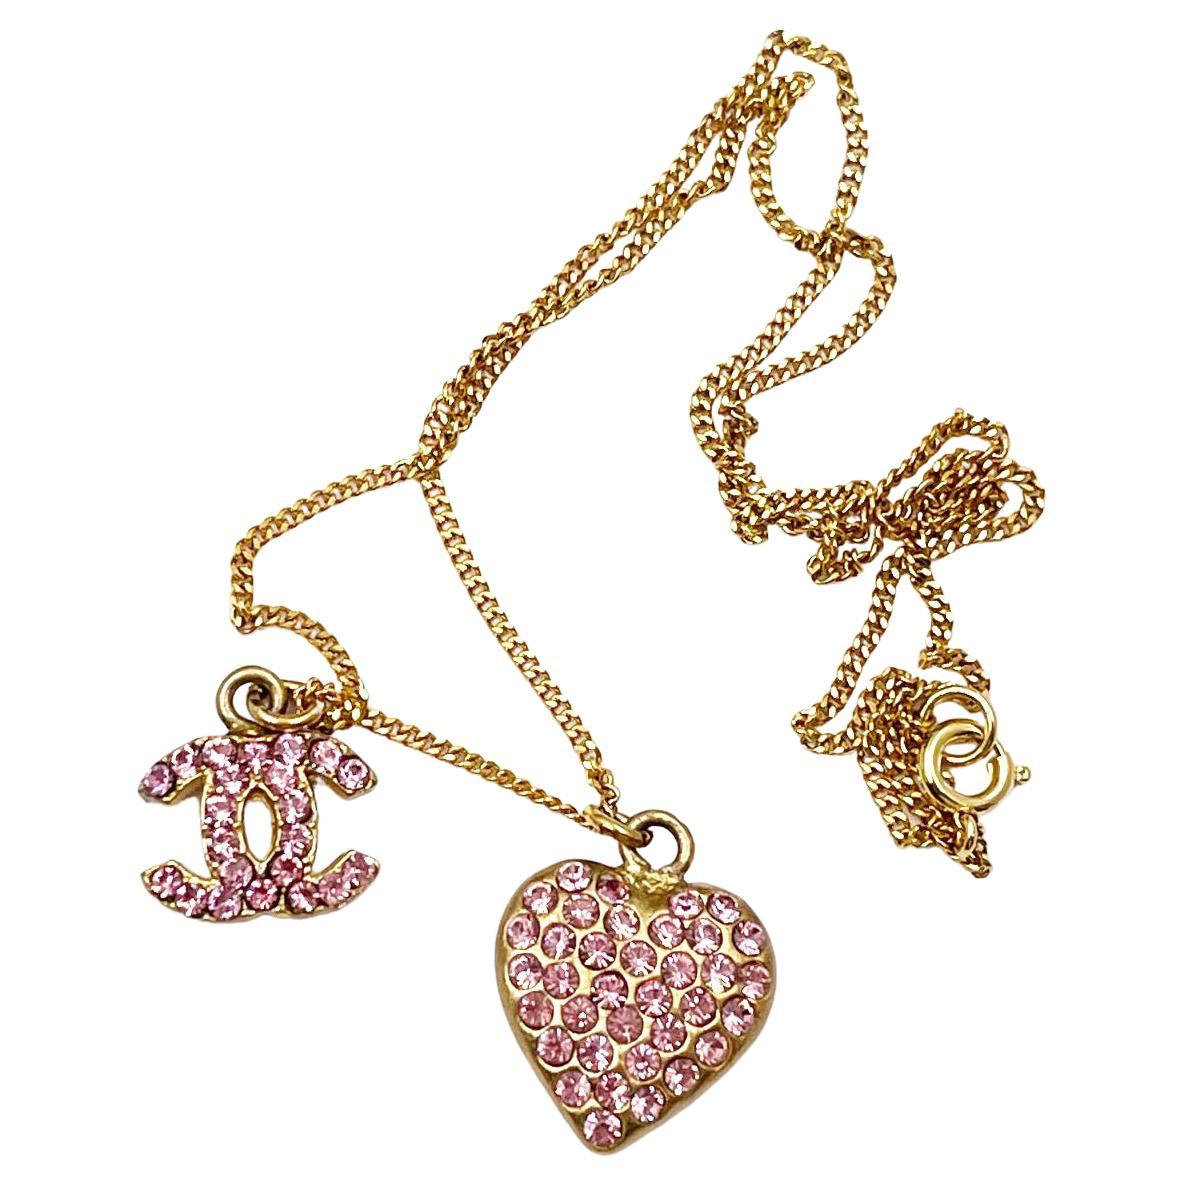 Chanel Heart Chain - 122 For Sale on 1stDibs  chanel heart necklace price, heart  necklace chanel, chanel necklace heart